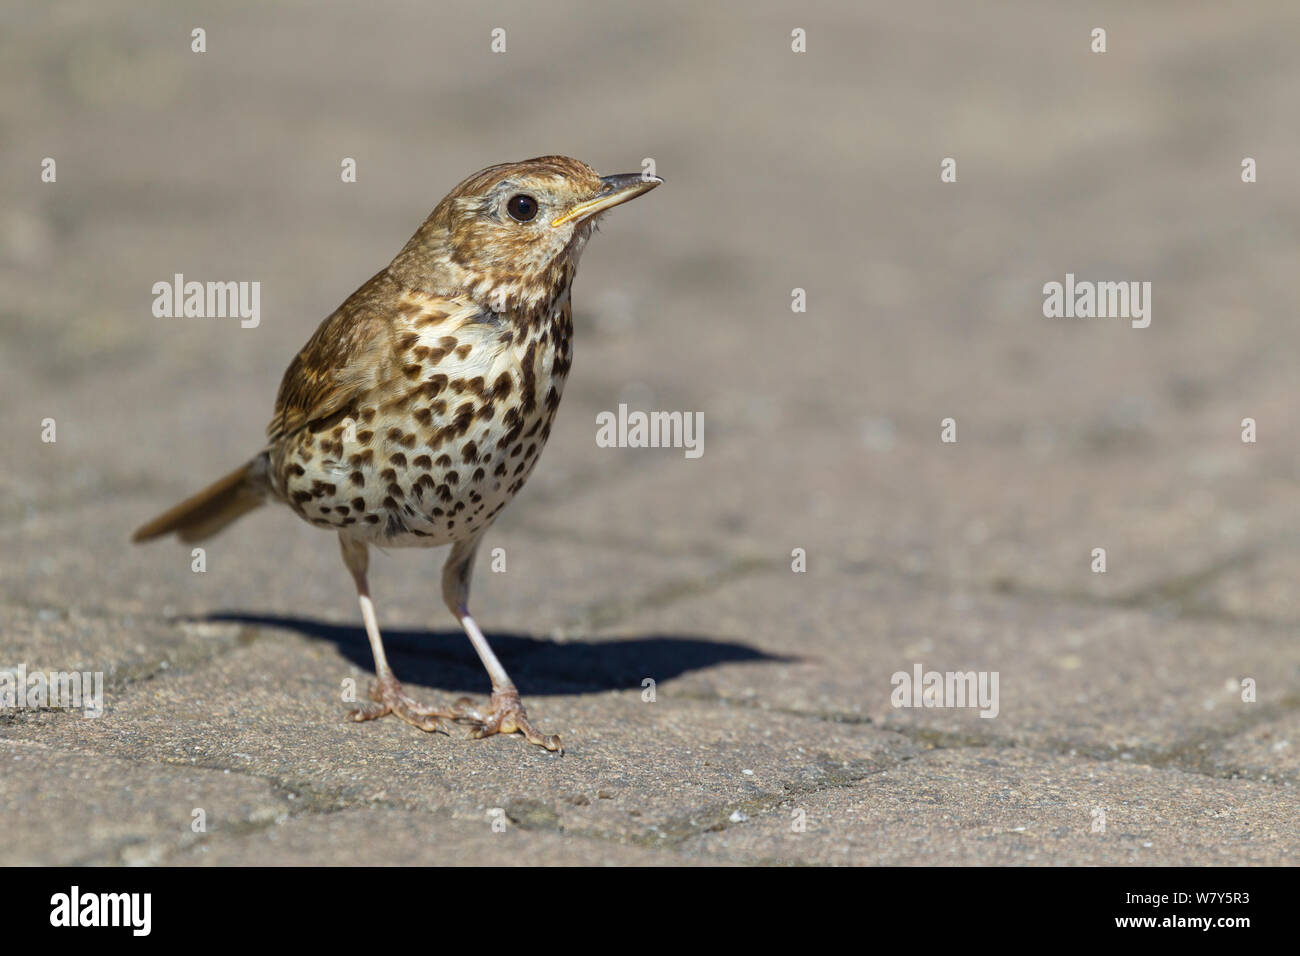 Song thrush (Turdus philomelos) standing on a path. Tresco, Isles of Scilly, United Kingdom. July. Stock Photo